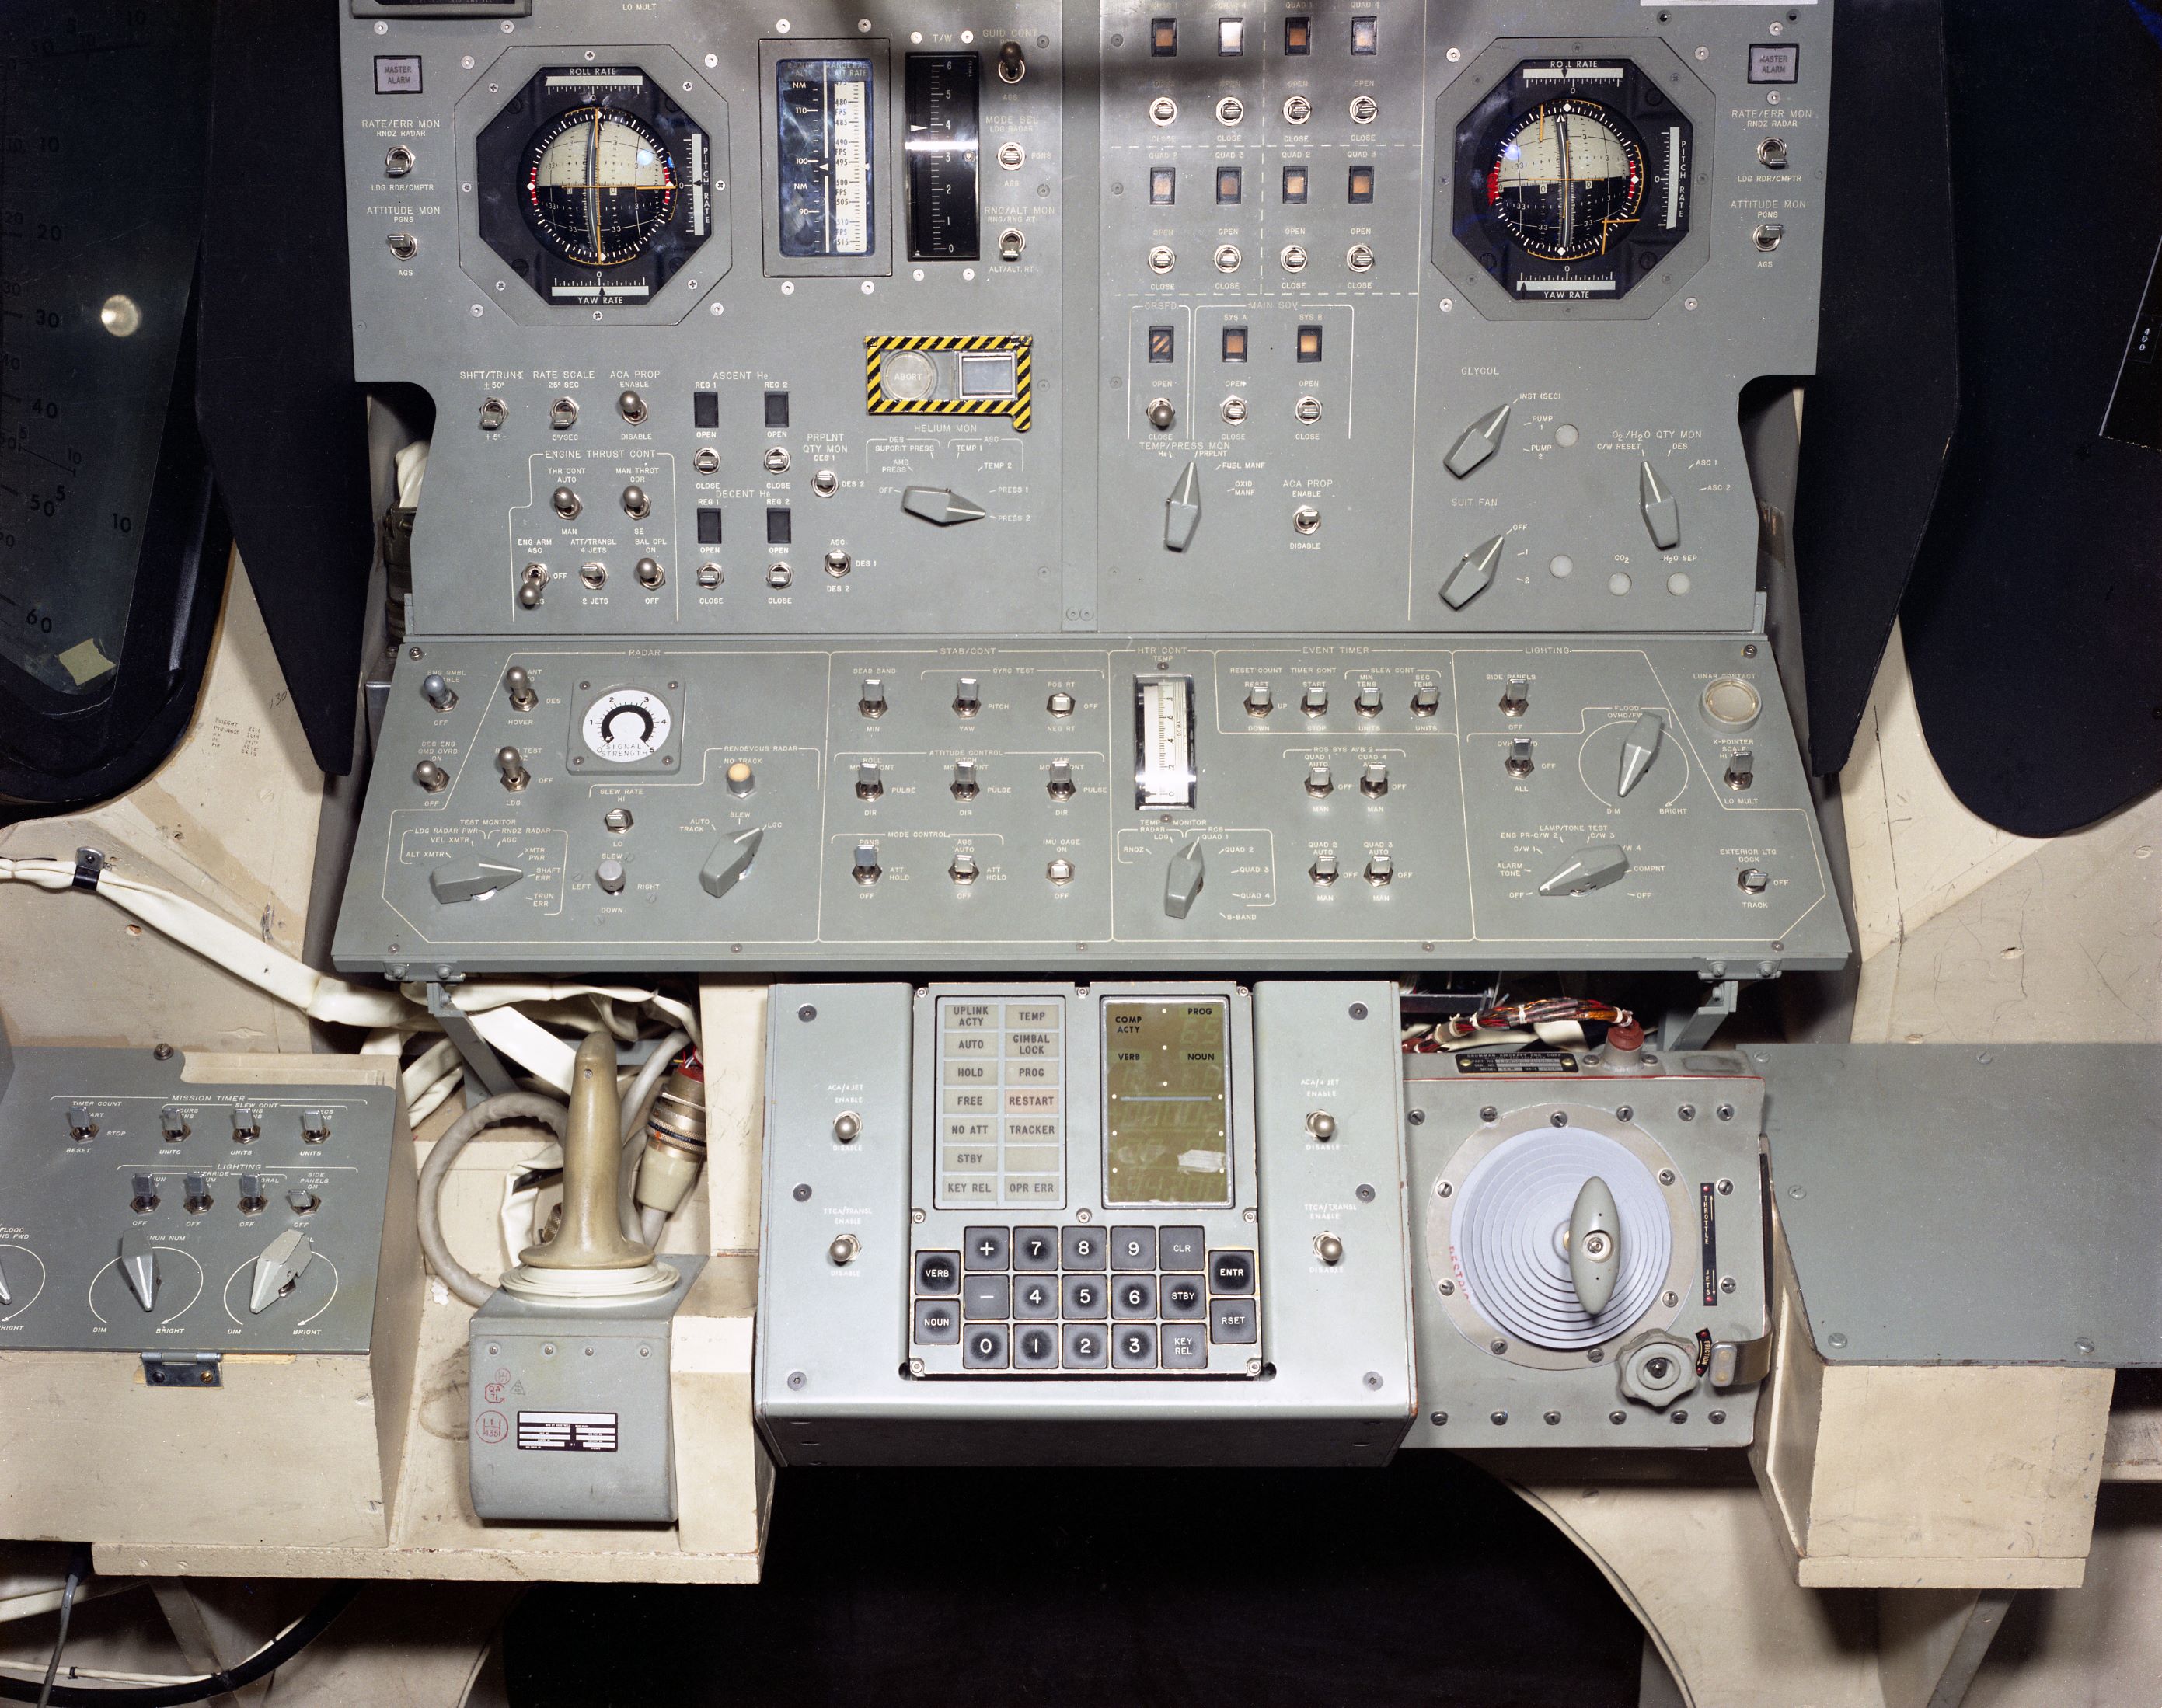 Apollo Primary Navigation, Guidance, and Control System for the Lunar Excursion Module Simulator